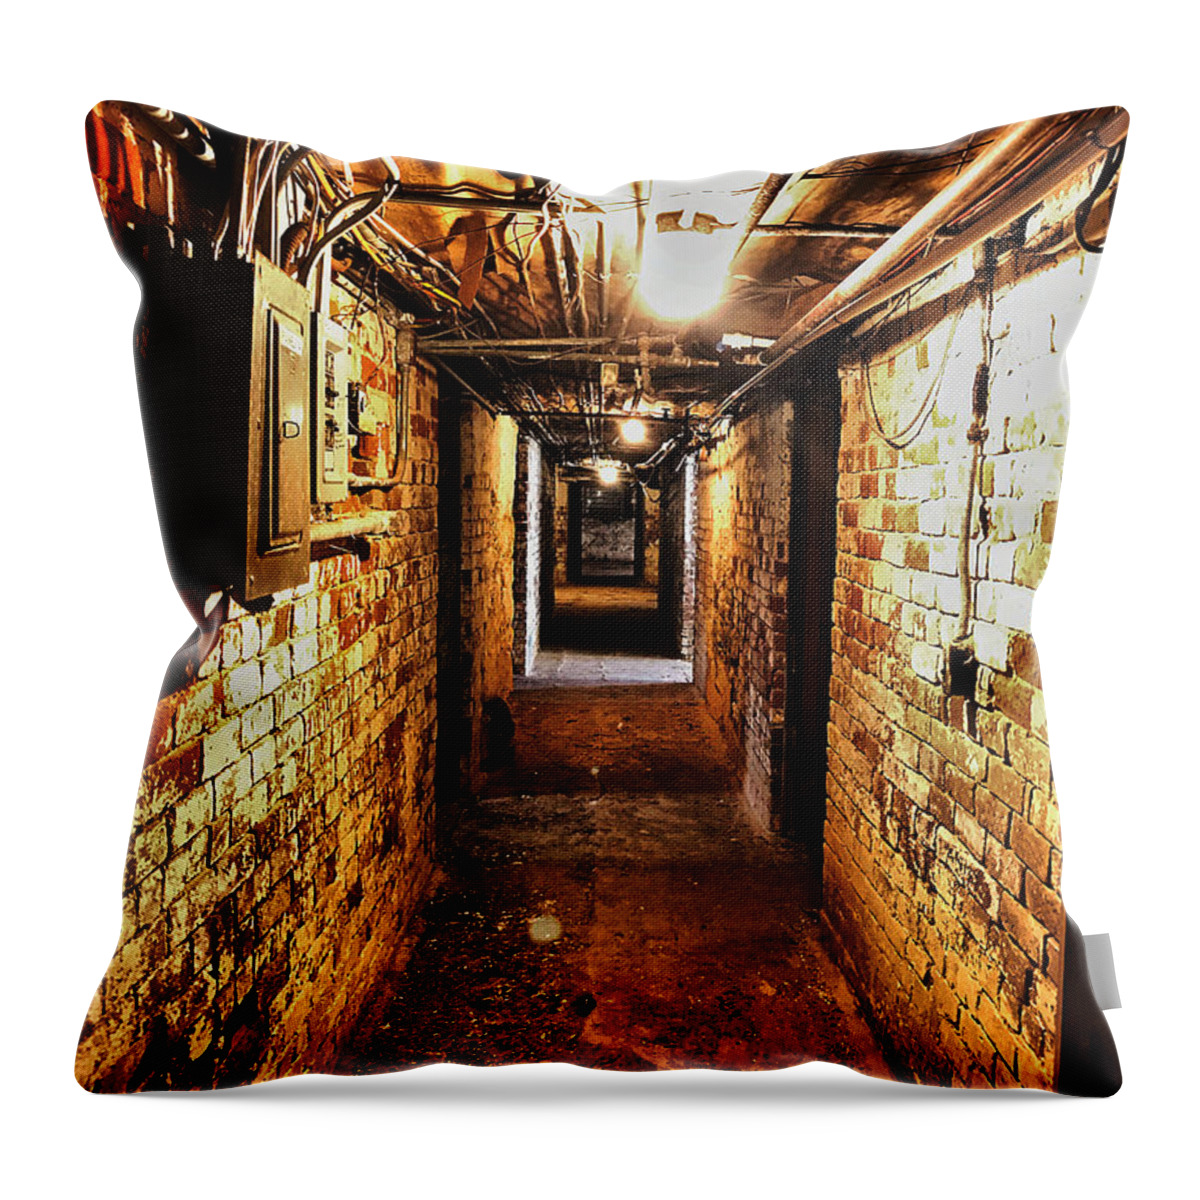  Throw Pillow featuring the photograph Bellmead basement by Stephen Dorton